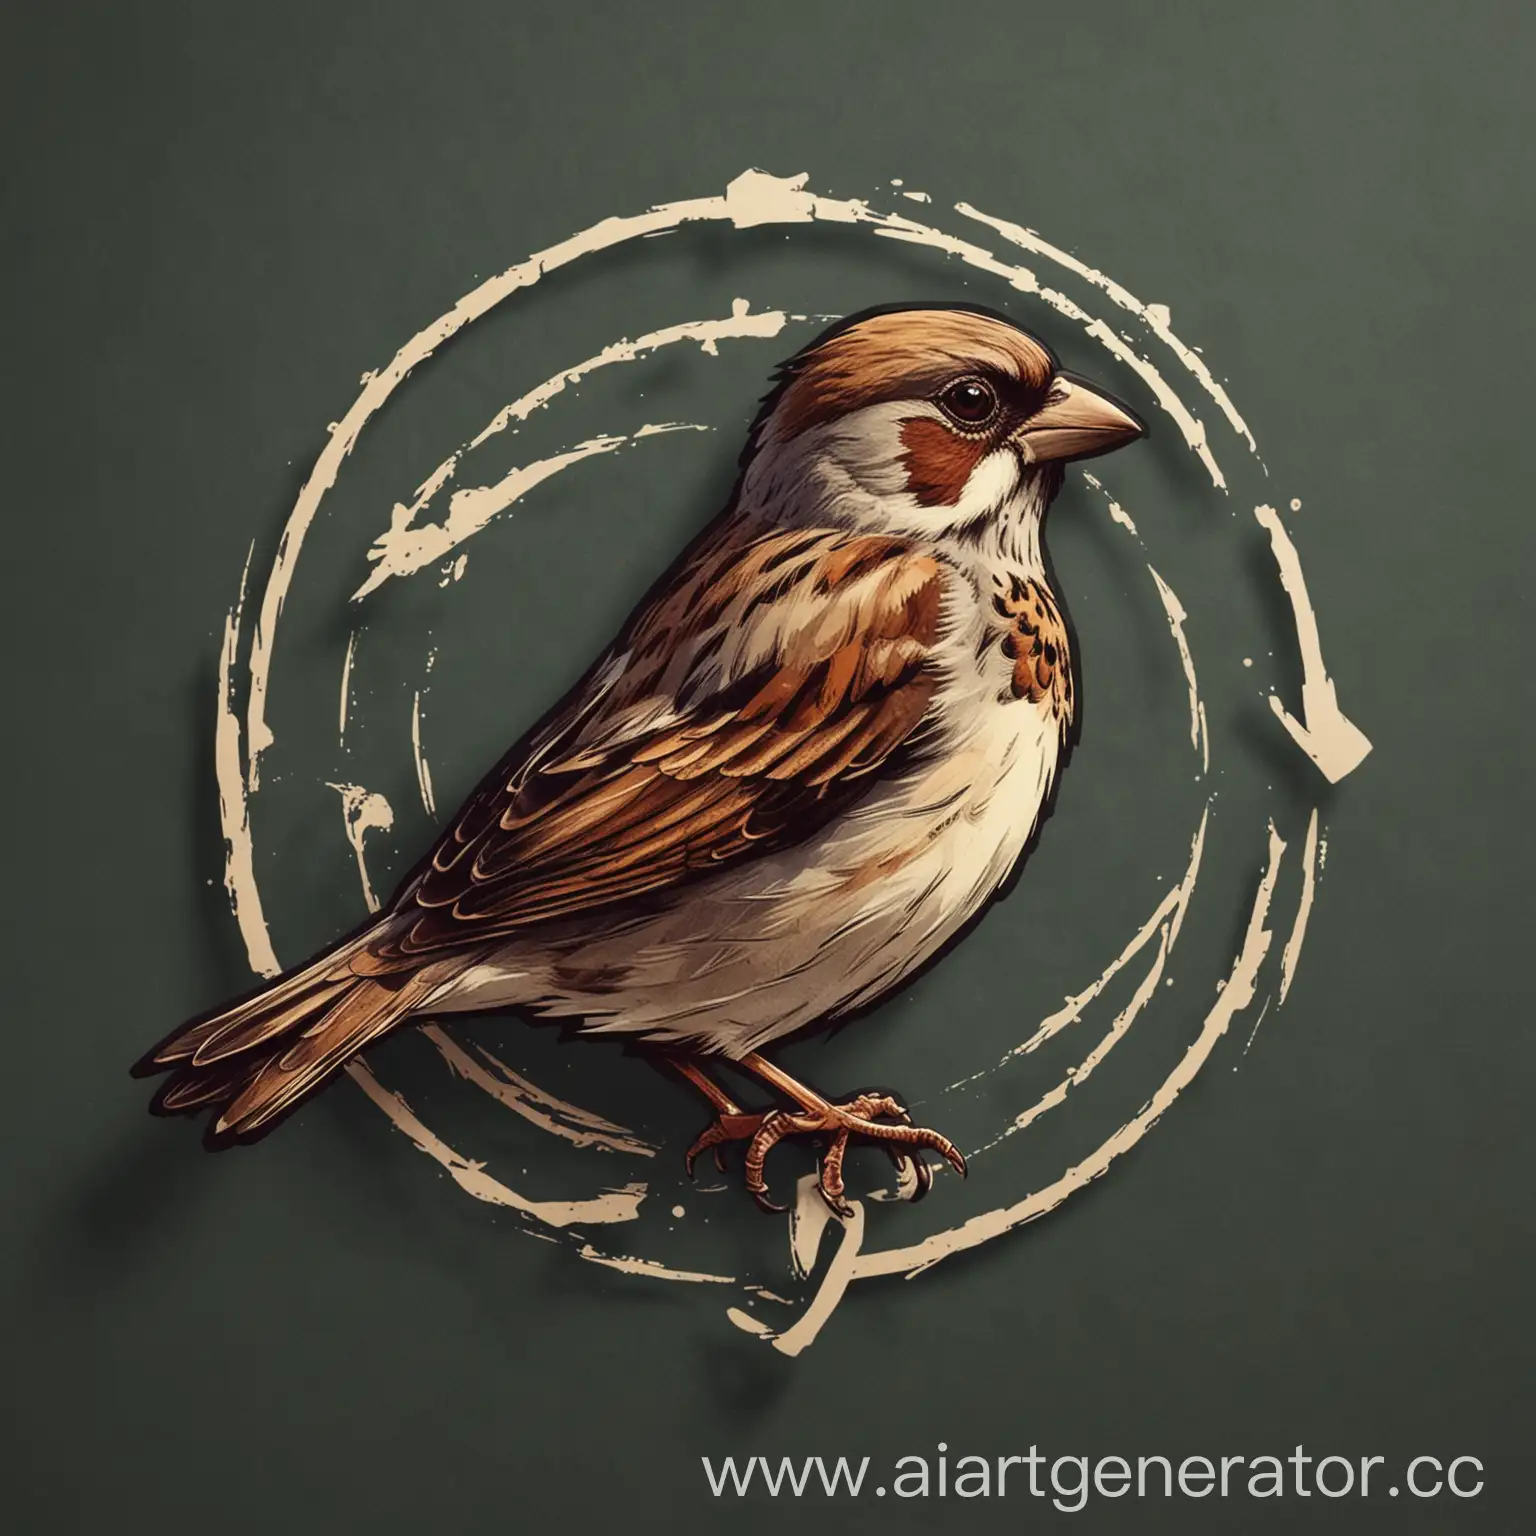 The sparrow in the logo.